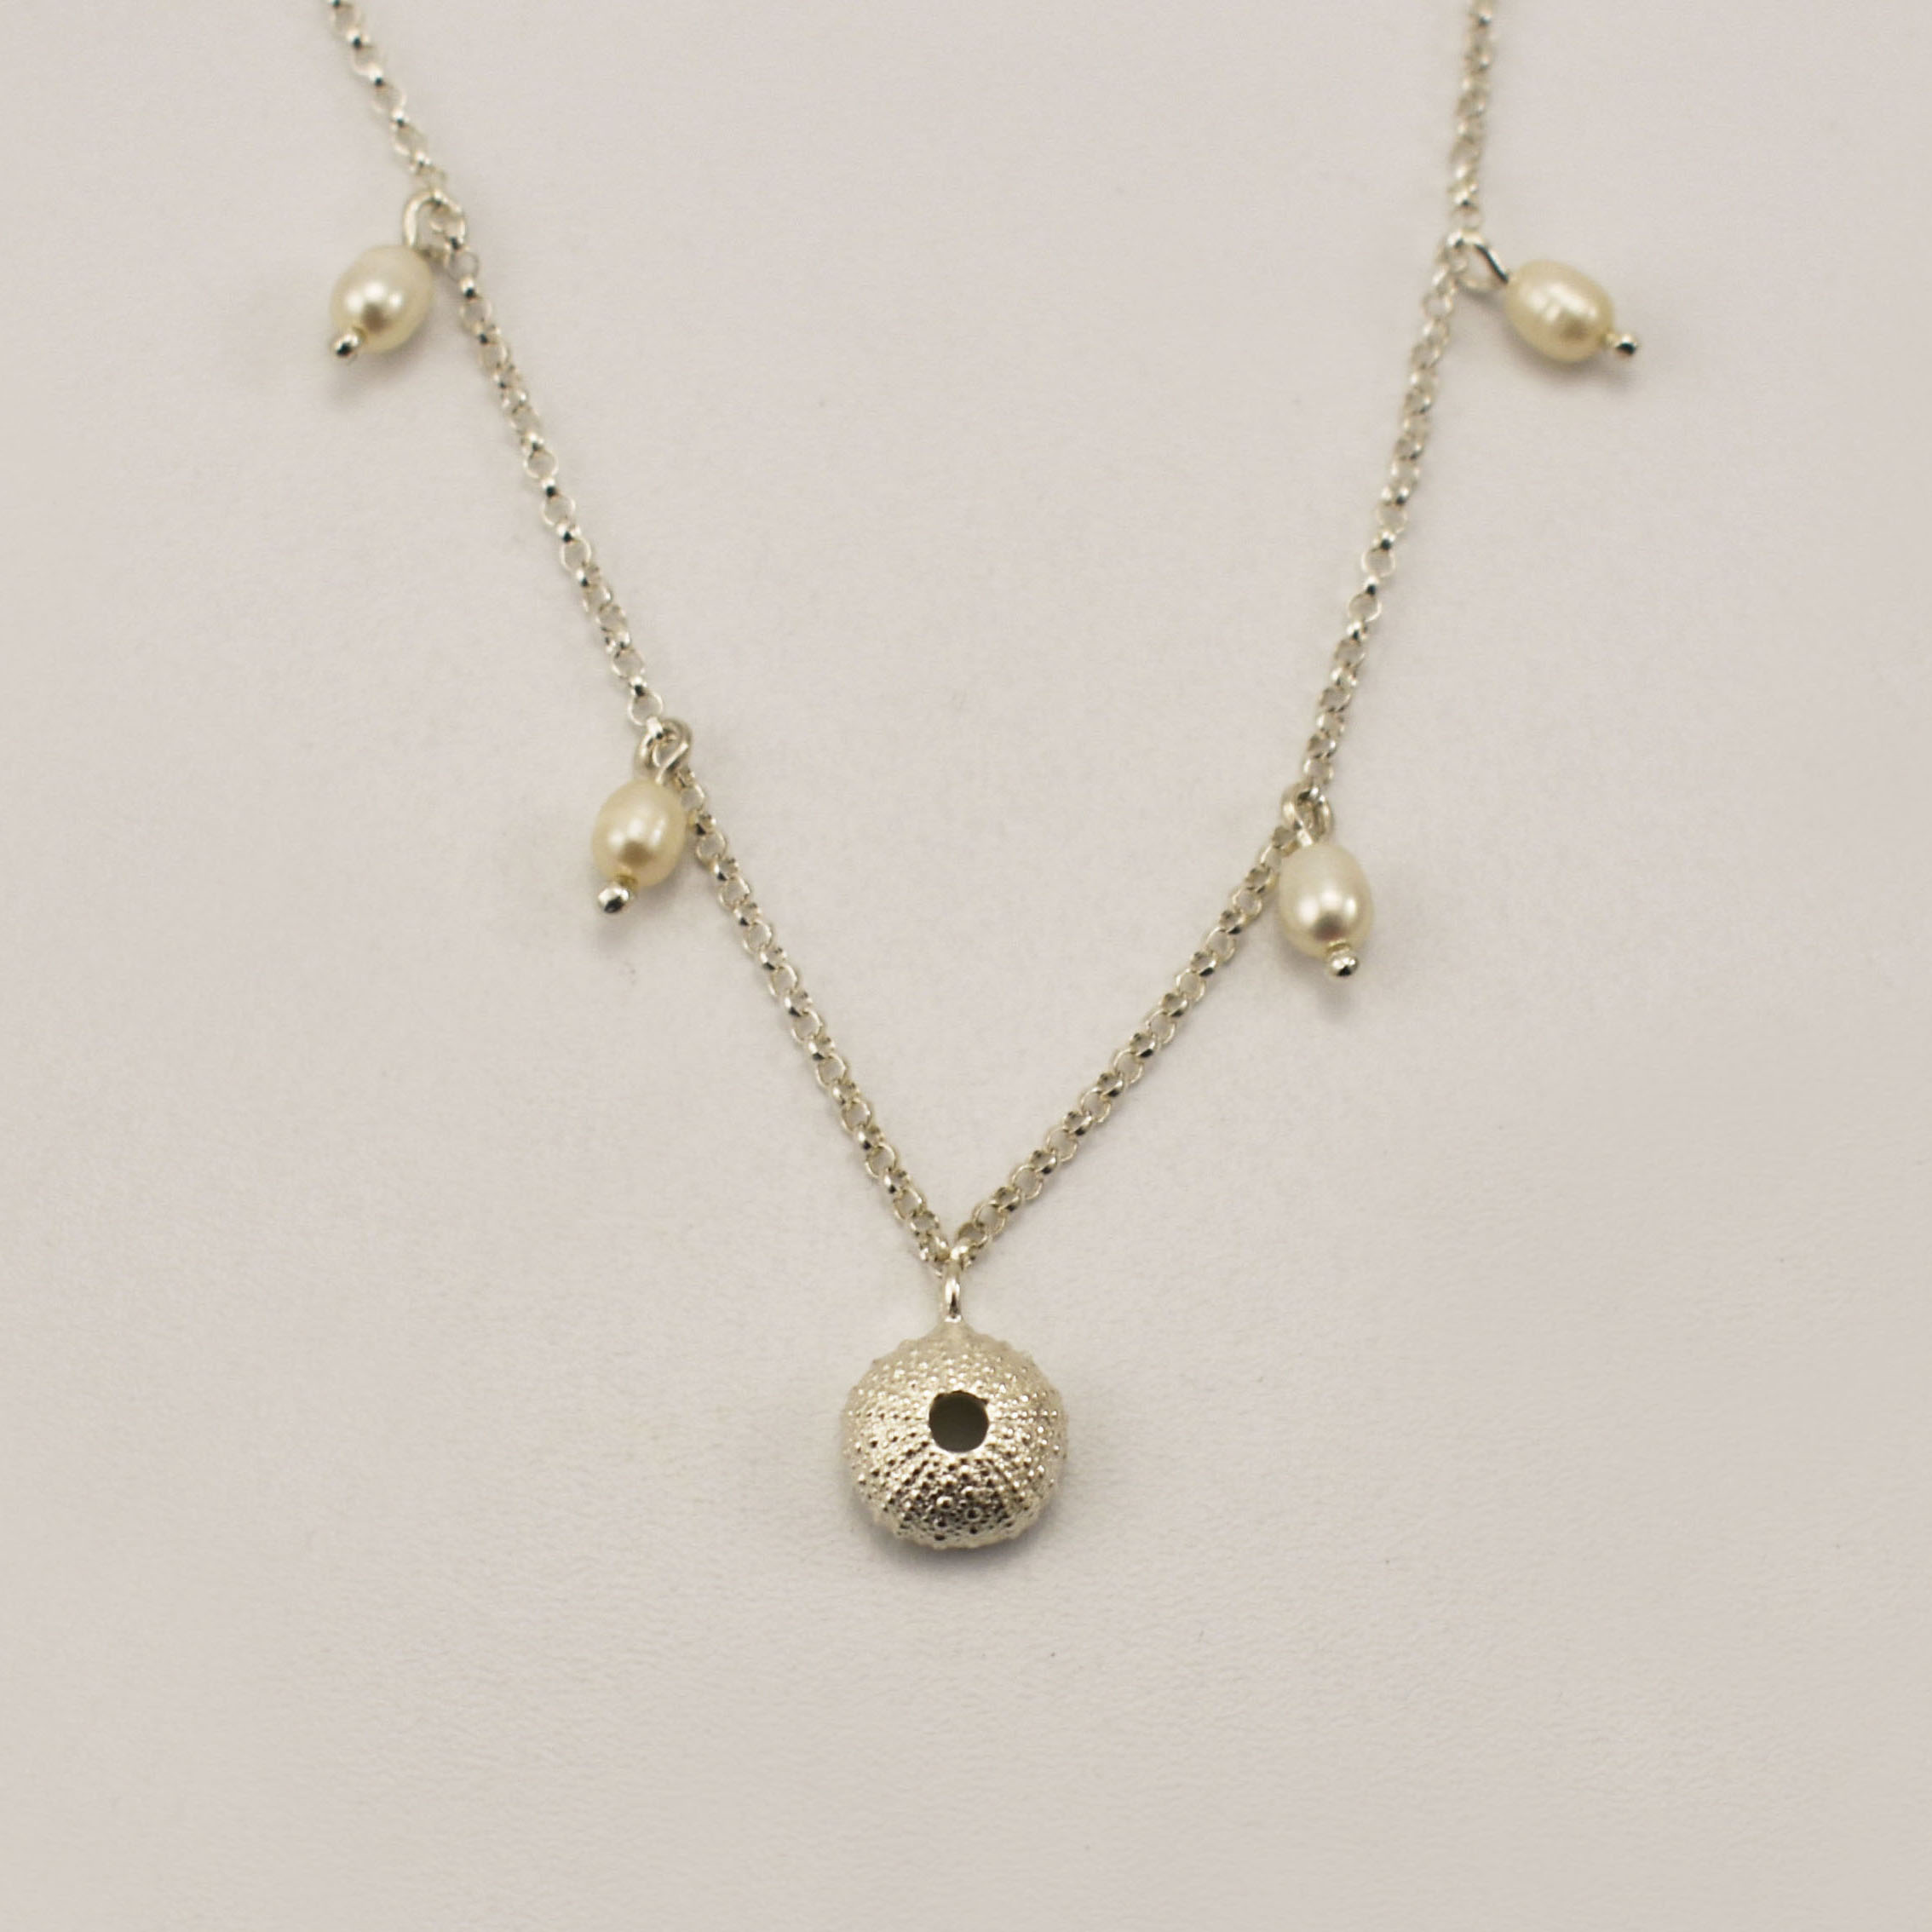 Sea Urchin Pearl Charm Necklace